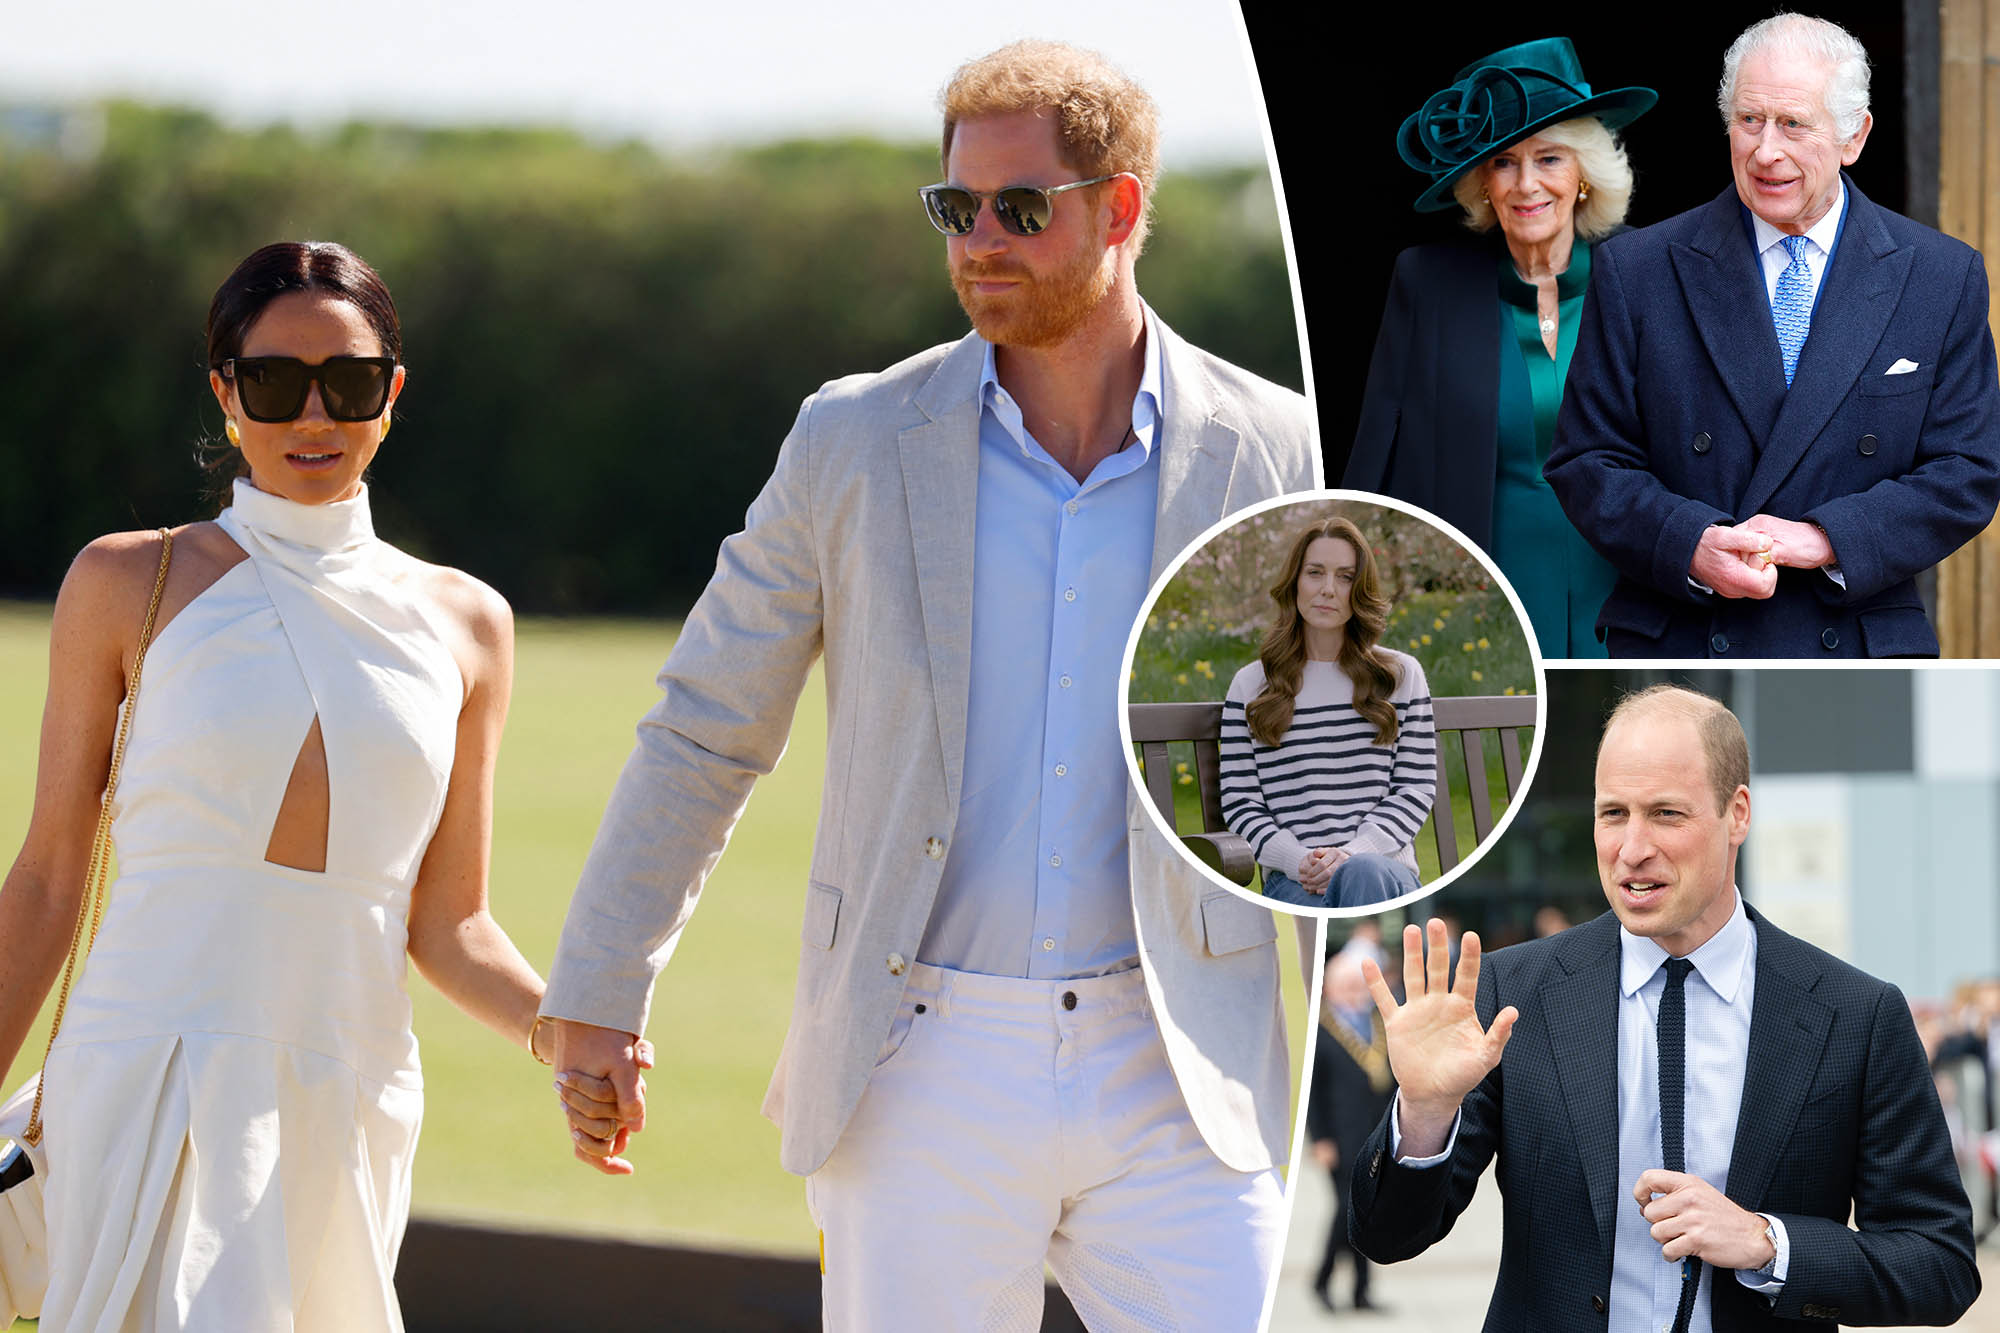 Prince Harry and Meghan Markle ‘in informational blackout’ with Kate, Charles’ health updates: expert